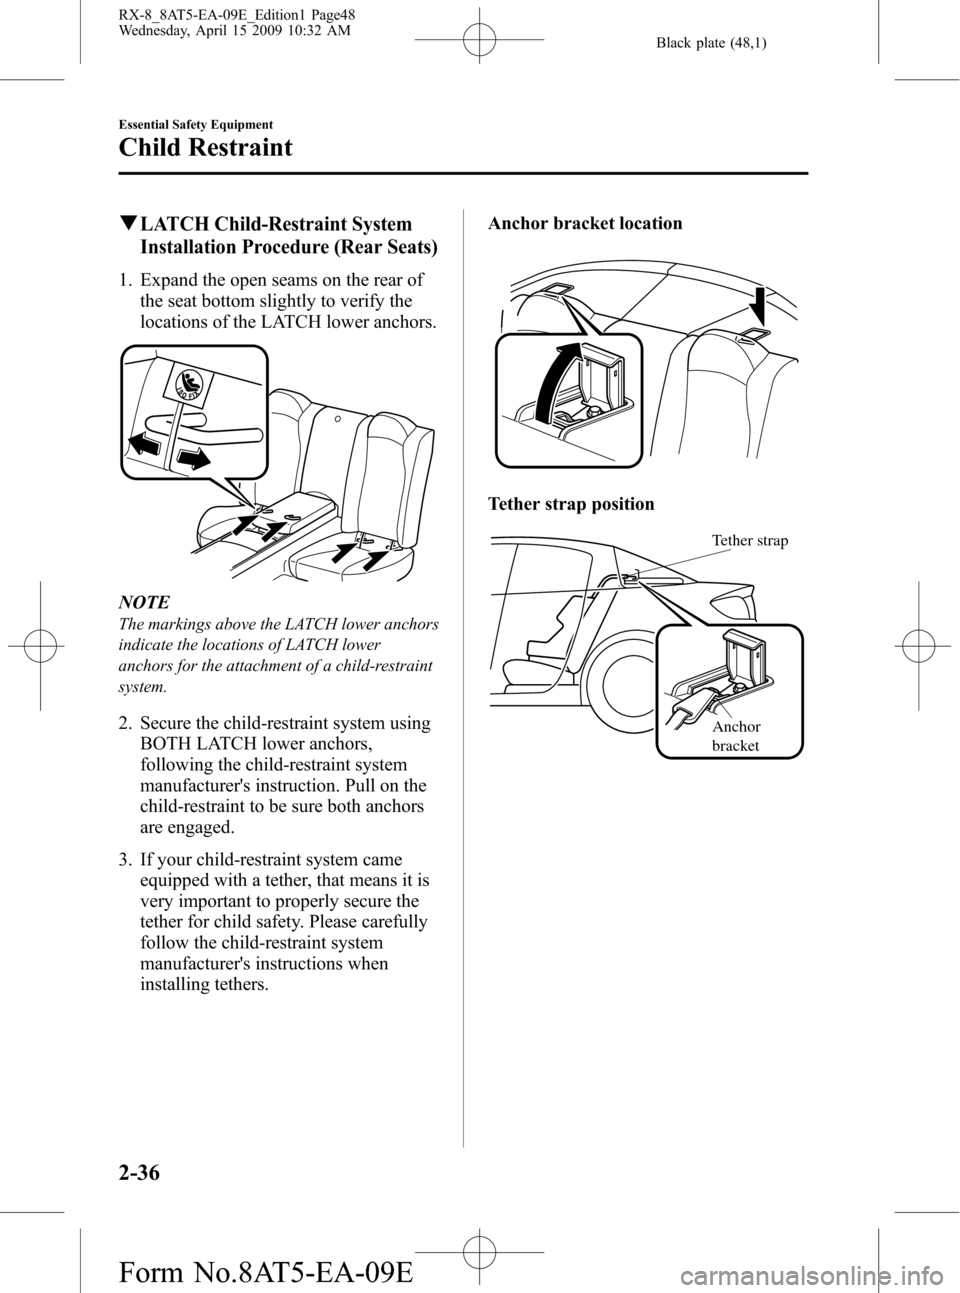 MAZDA MODEL RX 8 2010   (in English) Service Manual Black plate (48,1)
qLATCH Child-Restraint System
Installation Procedure (Rear Seats)
1. Expand the open seams on the rear of
the seat bottom slightly to verify the
locations of the LATCH lower anchors